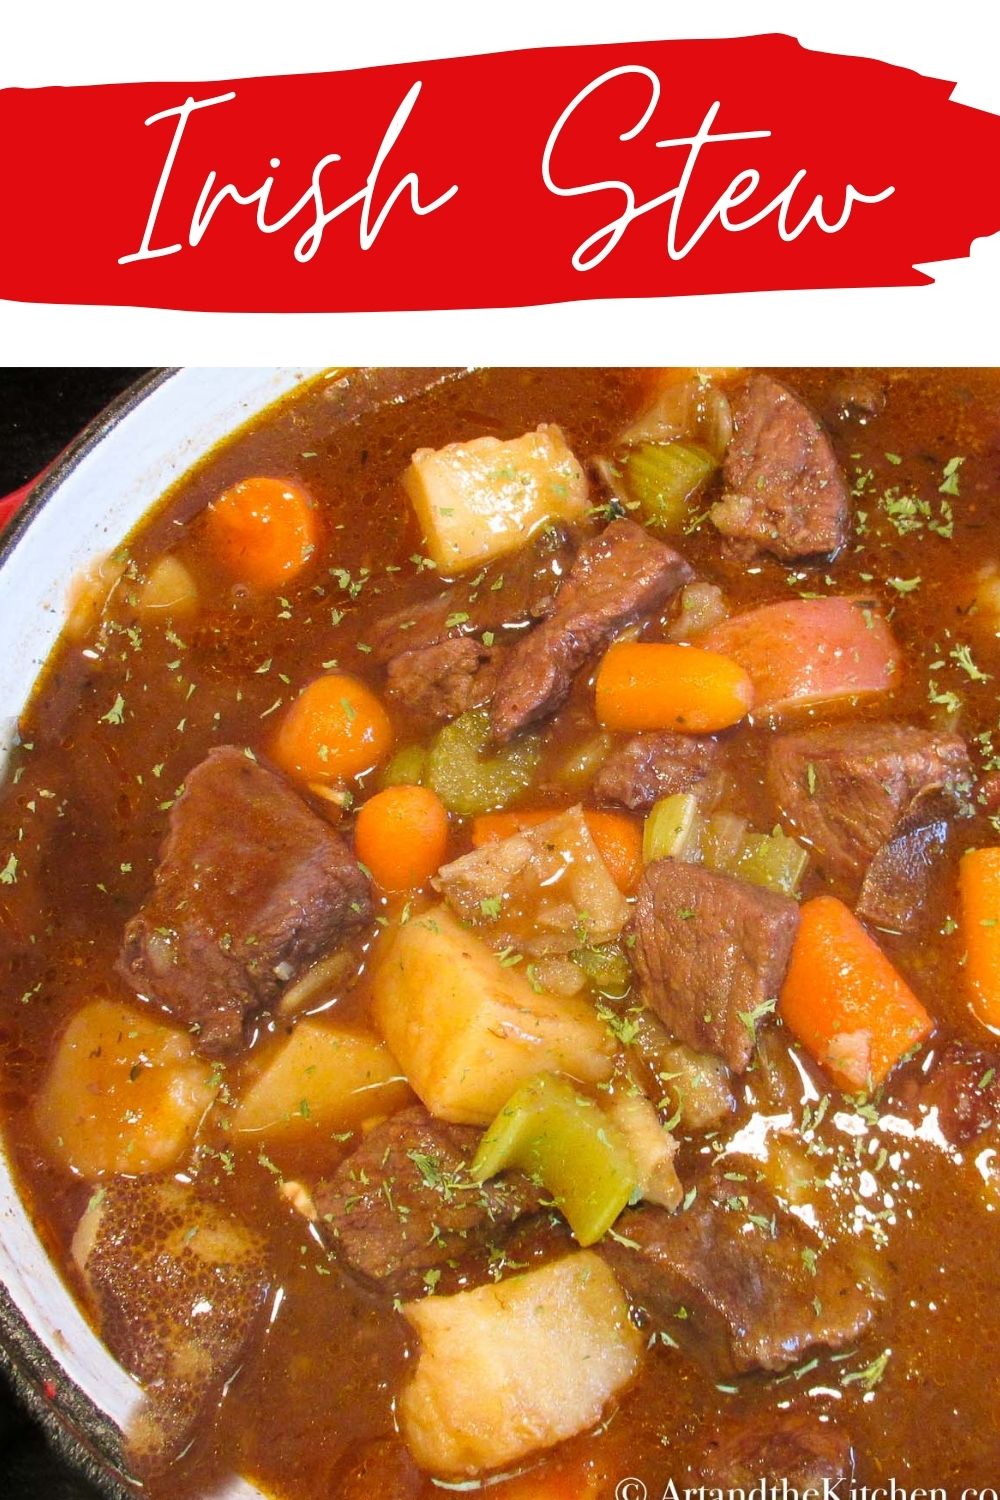 This Irish Stew recipe is one of my best stew recipes! This savory stew is flavored with Guinness beer and red wine! A perfect dinner recipe for St. Patrick's Day. A saucy stew of beef and vegetables in a cast-iron pot via @artandthekitch